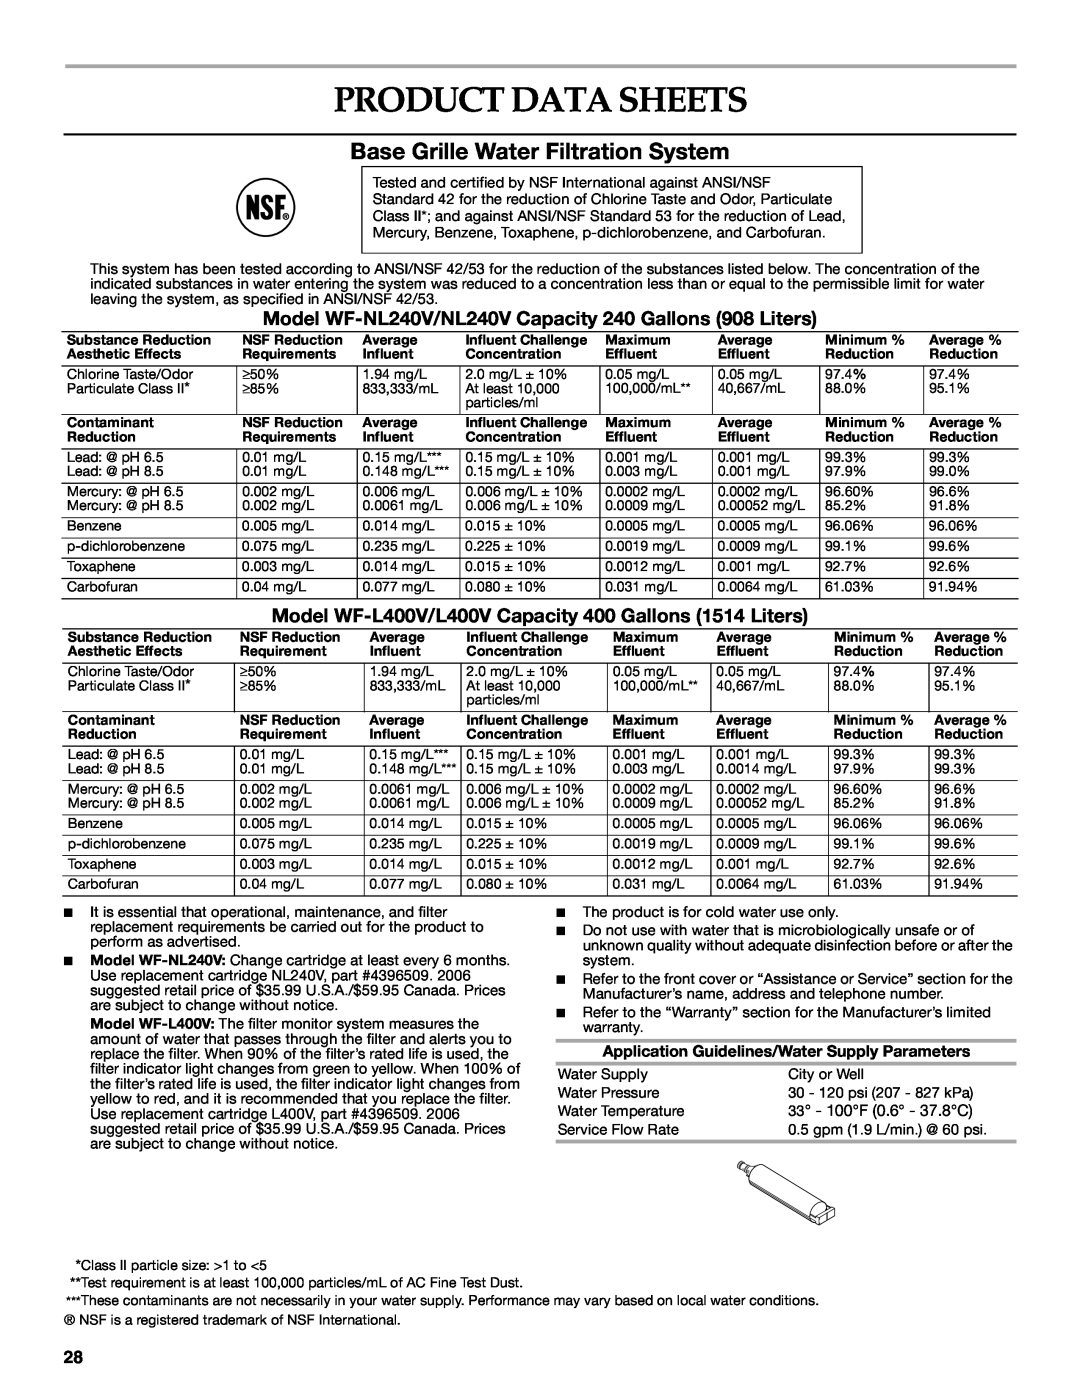 KitchenAid 2318581 manual Product Data Sheets, Base Grille Water Filtration System 